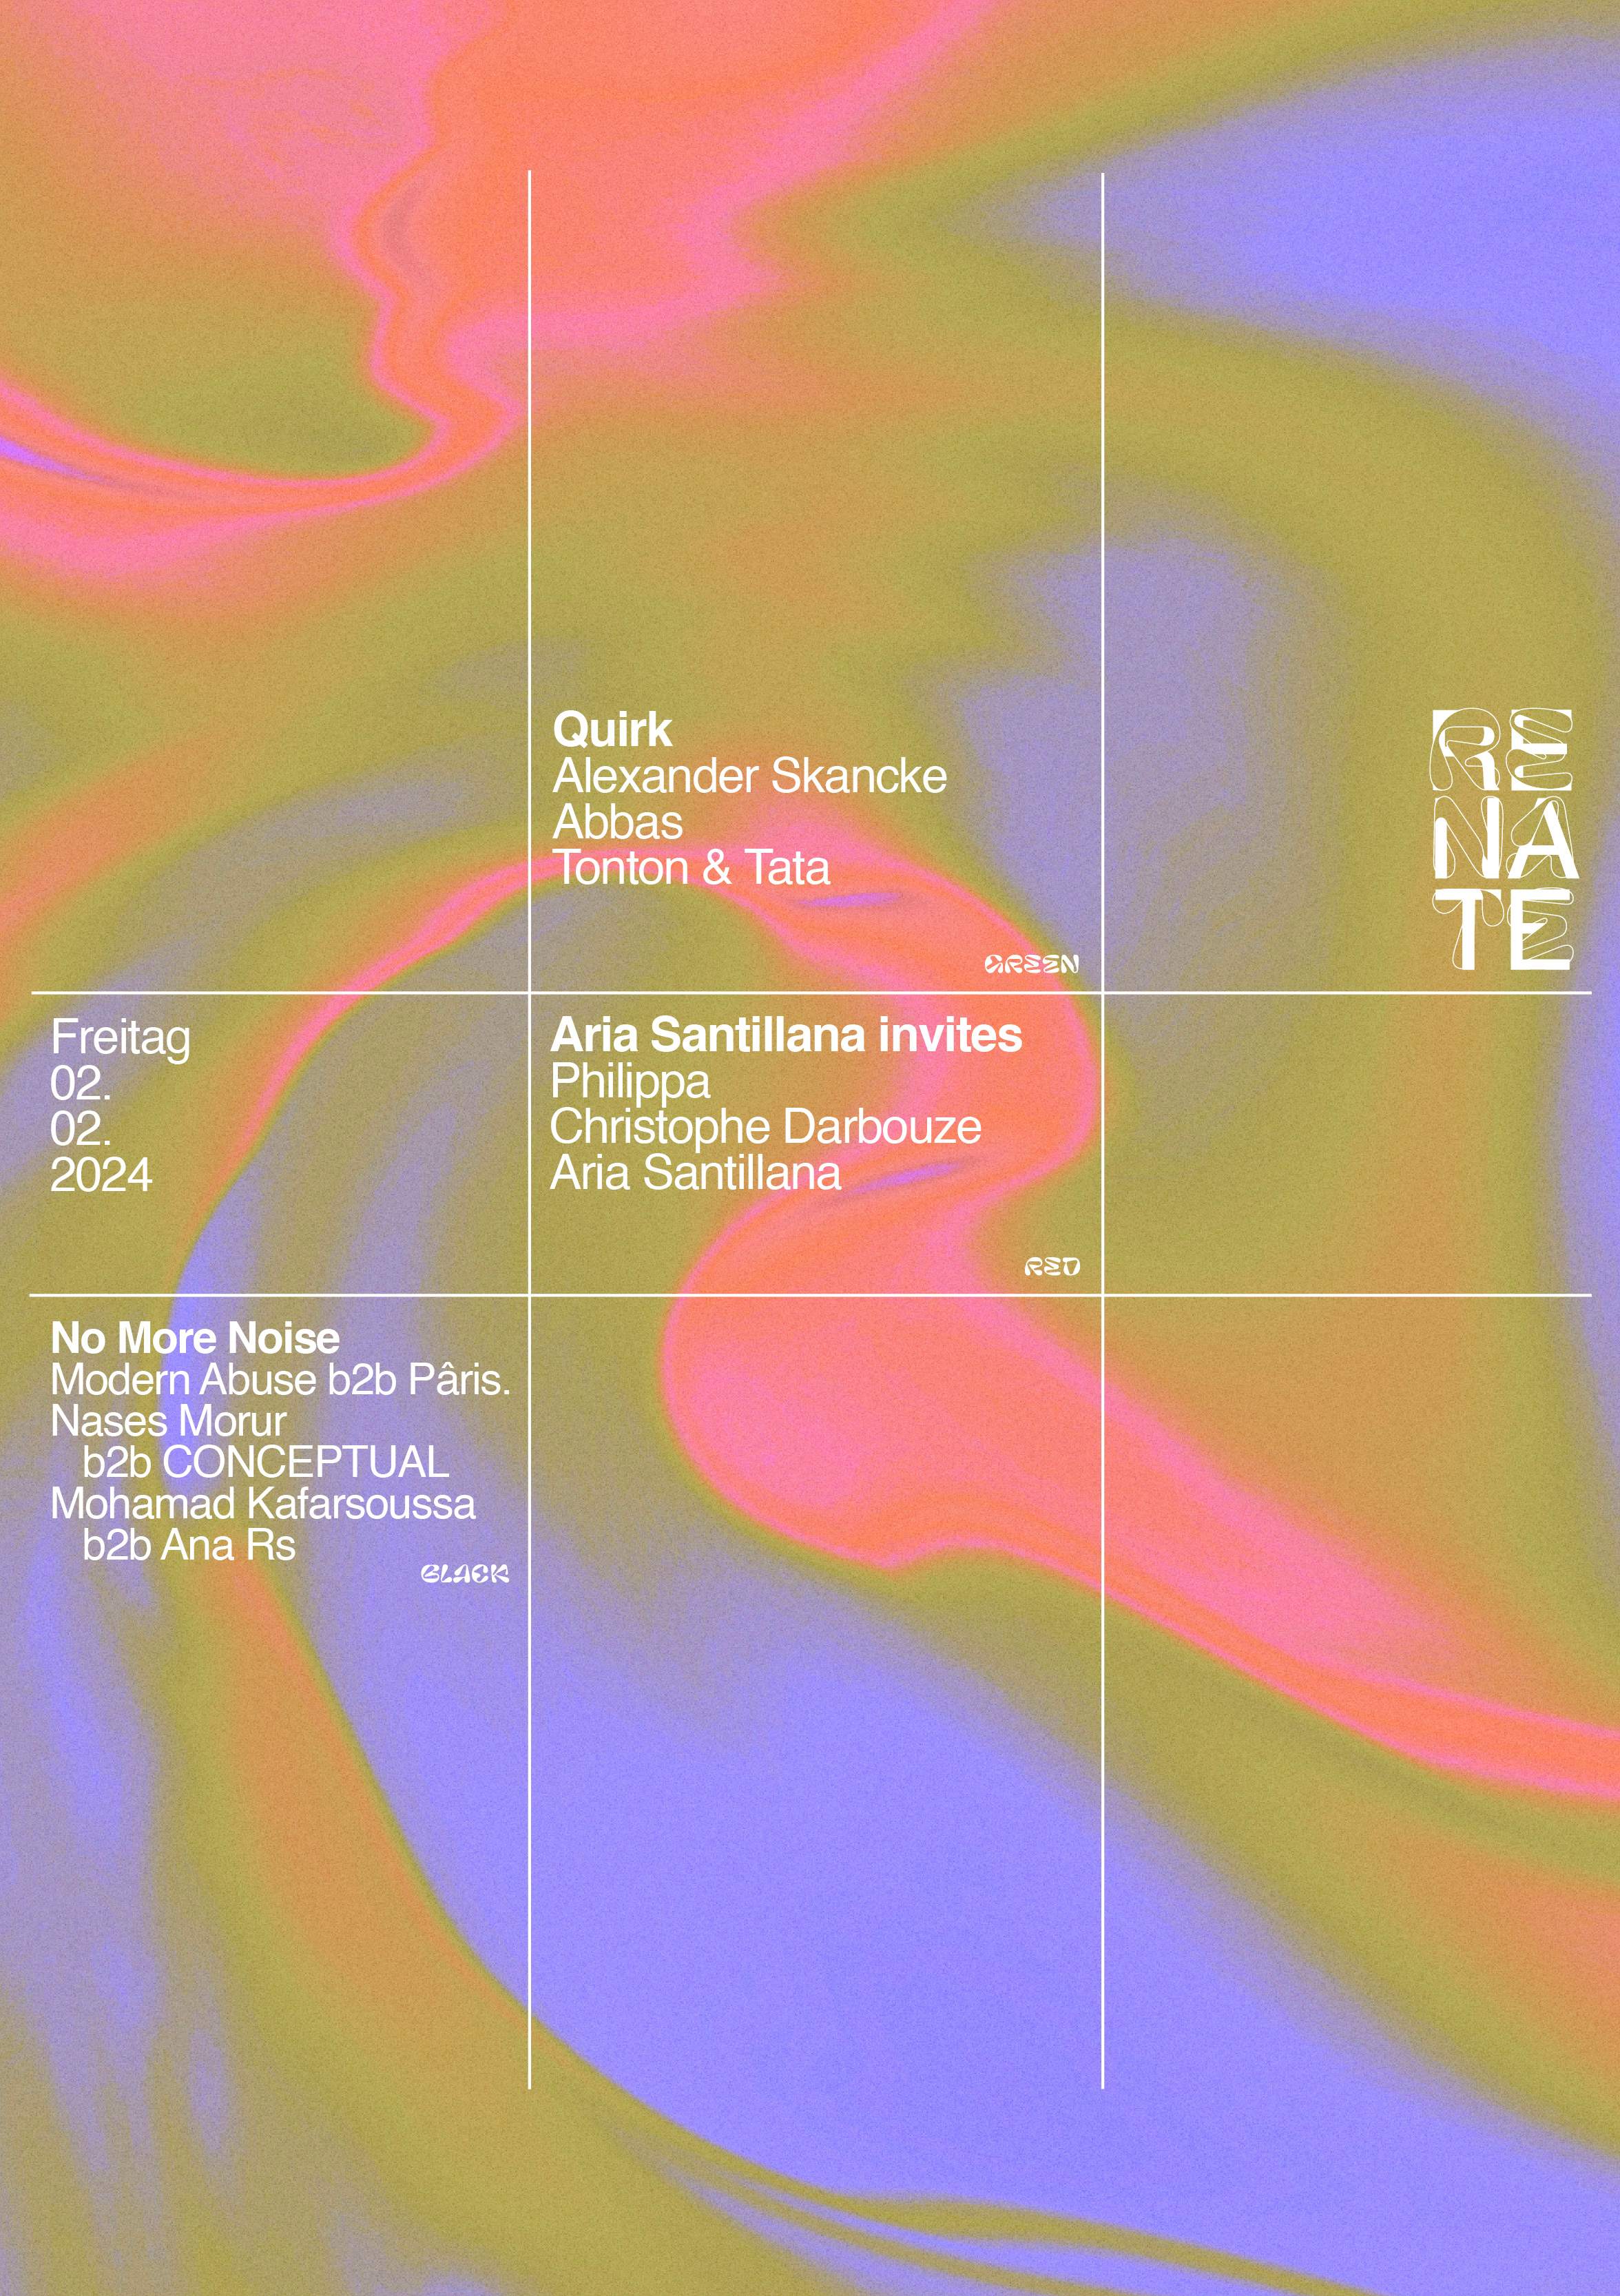 Renate Klubnacht with No More Noise, Quirk, Philippa, Aria Santillana, Christophe Darbouze - フライヤー表